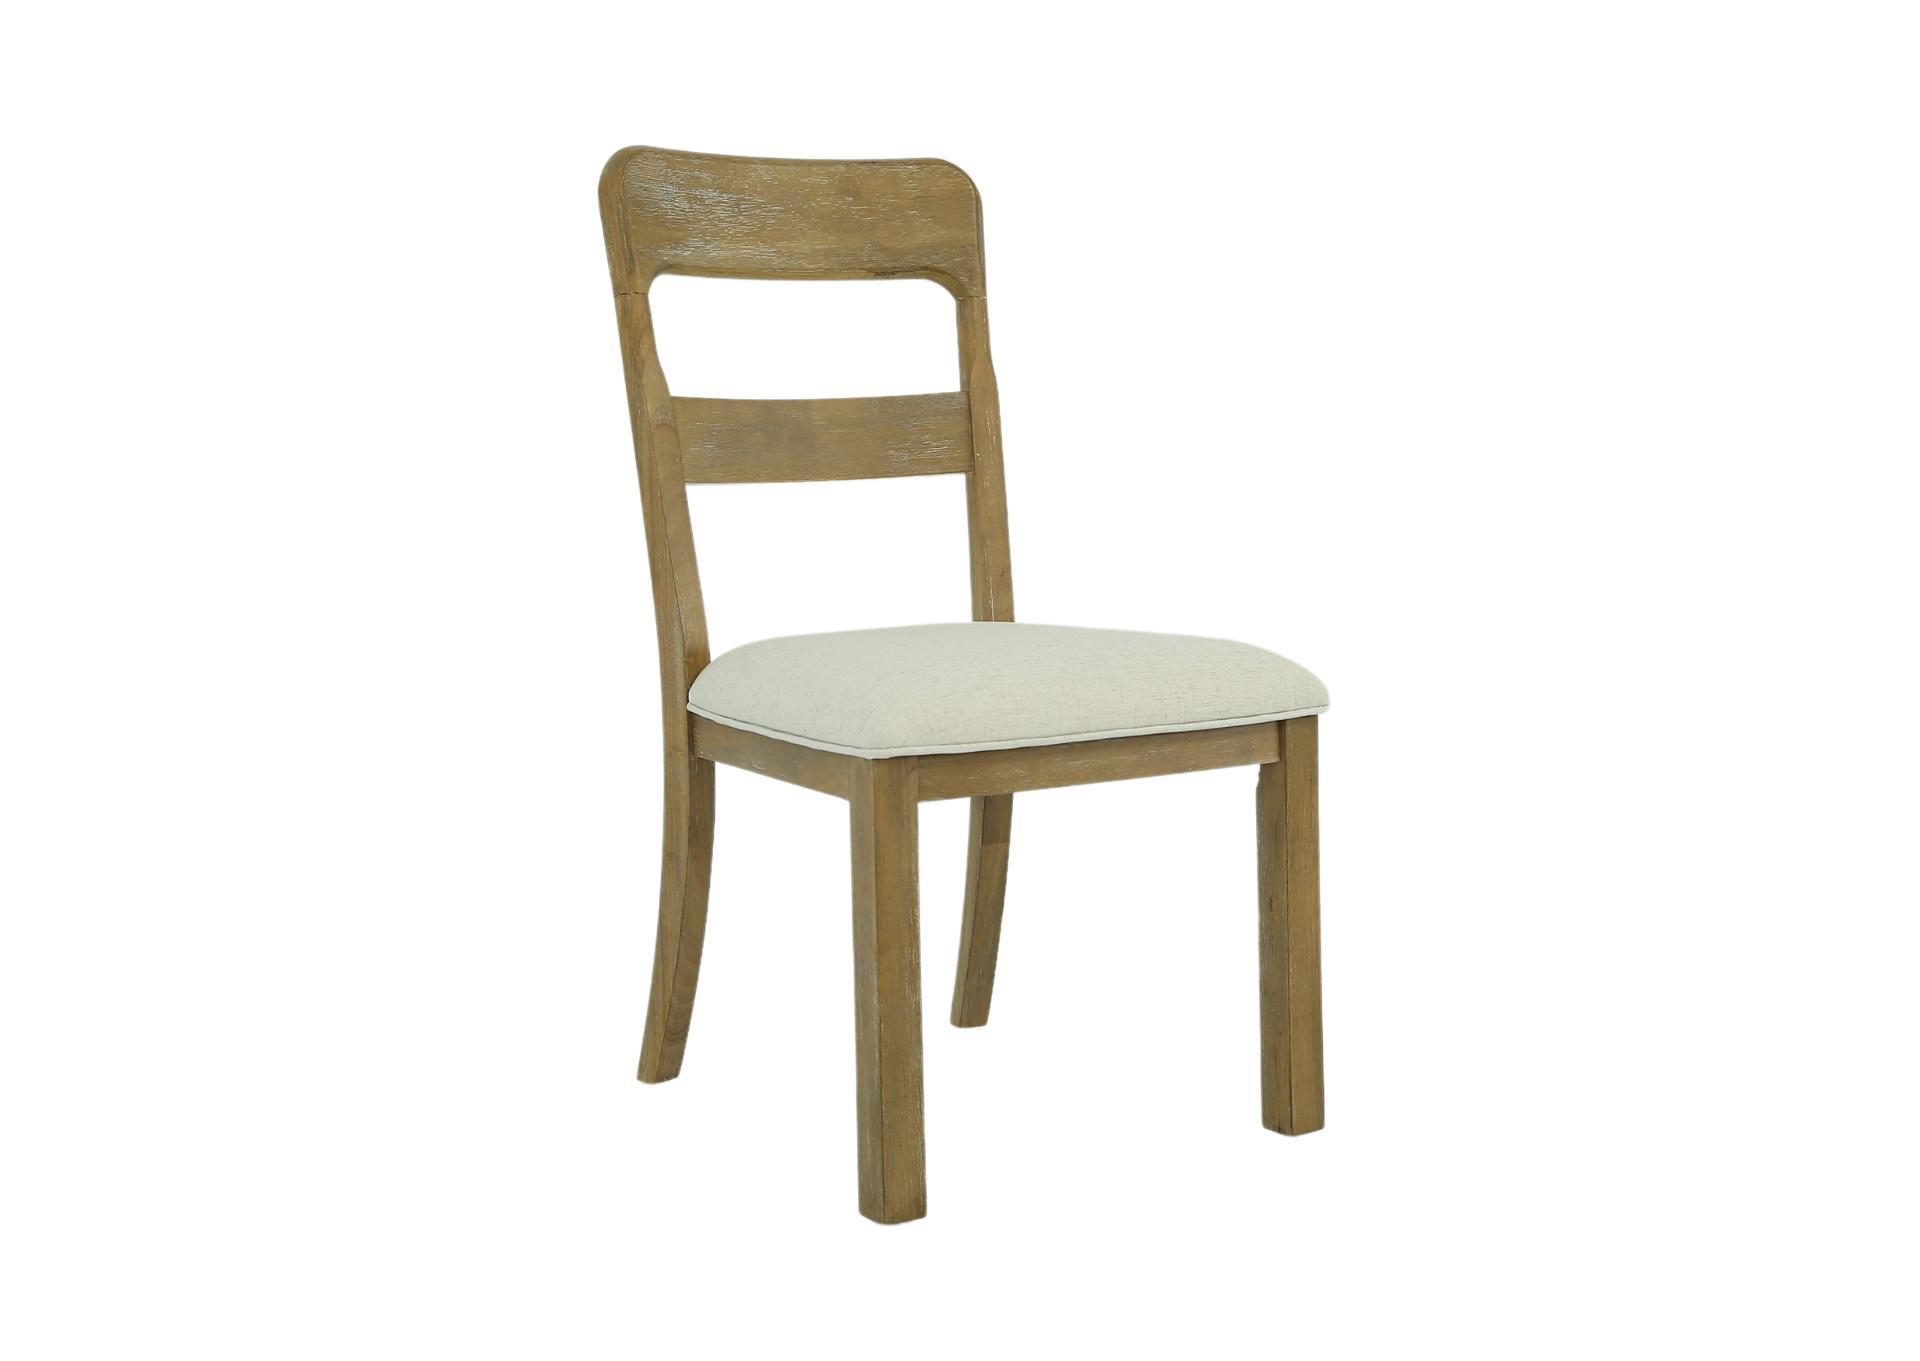 LYNNFIELD SIDE CHAIR,MAGS